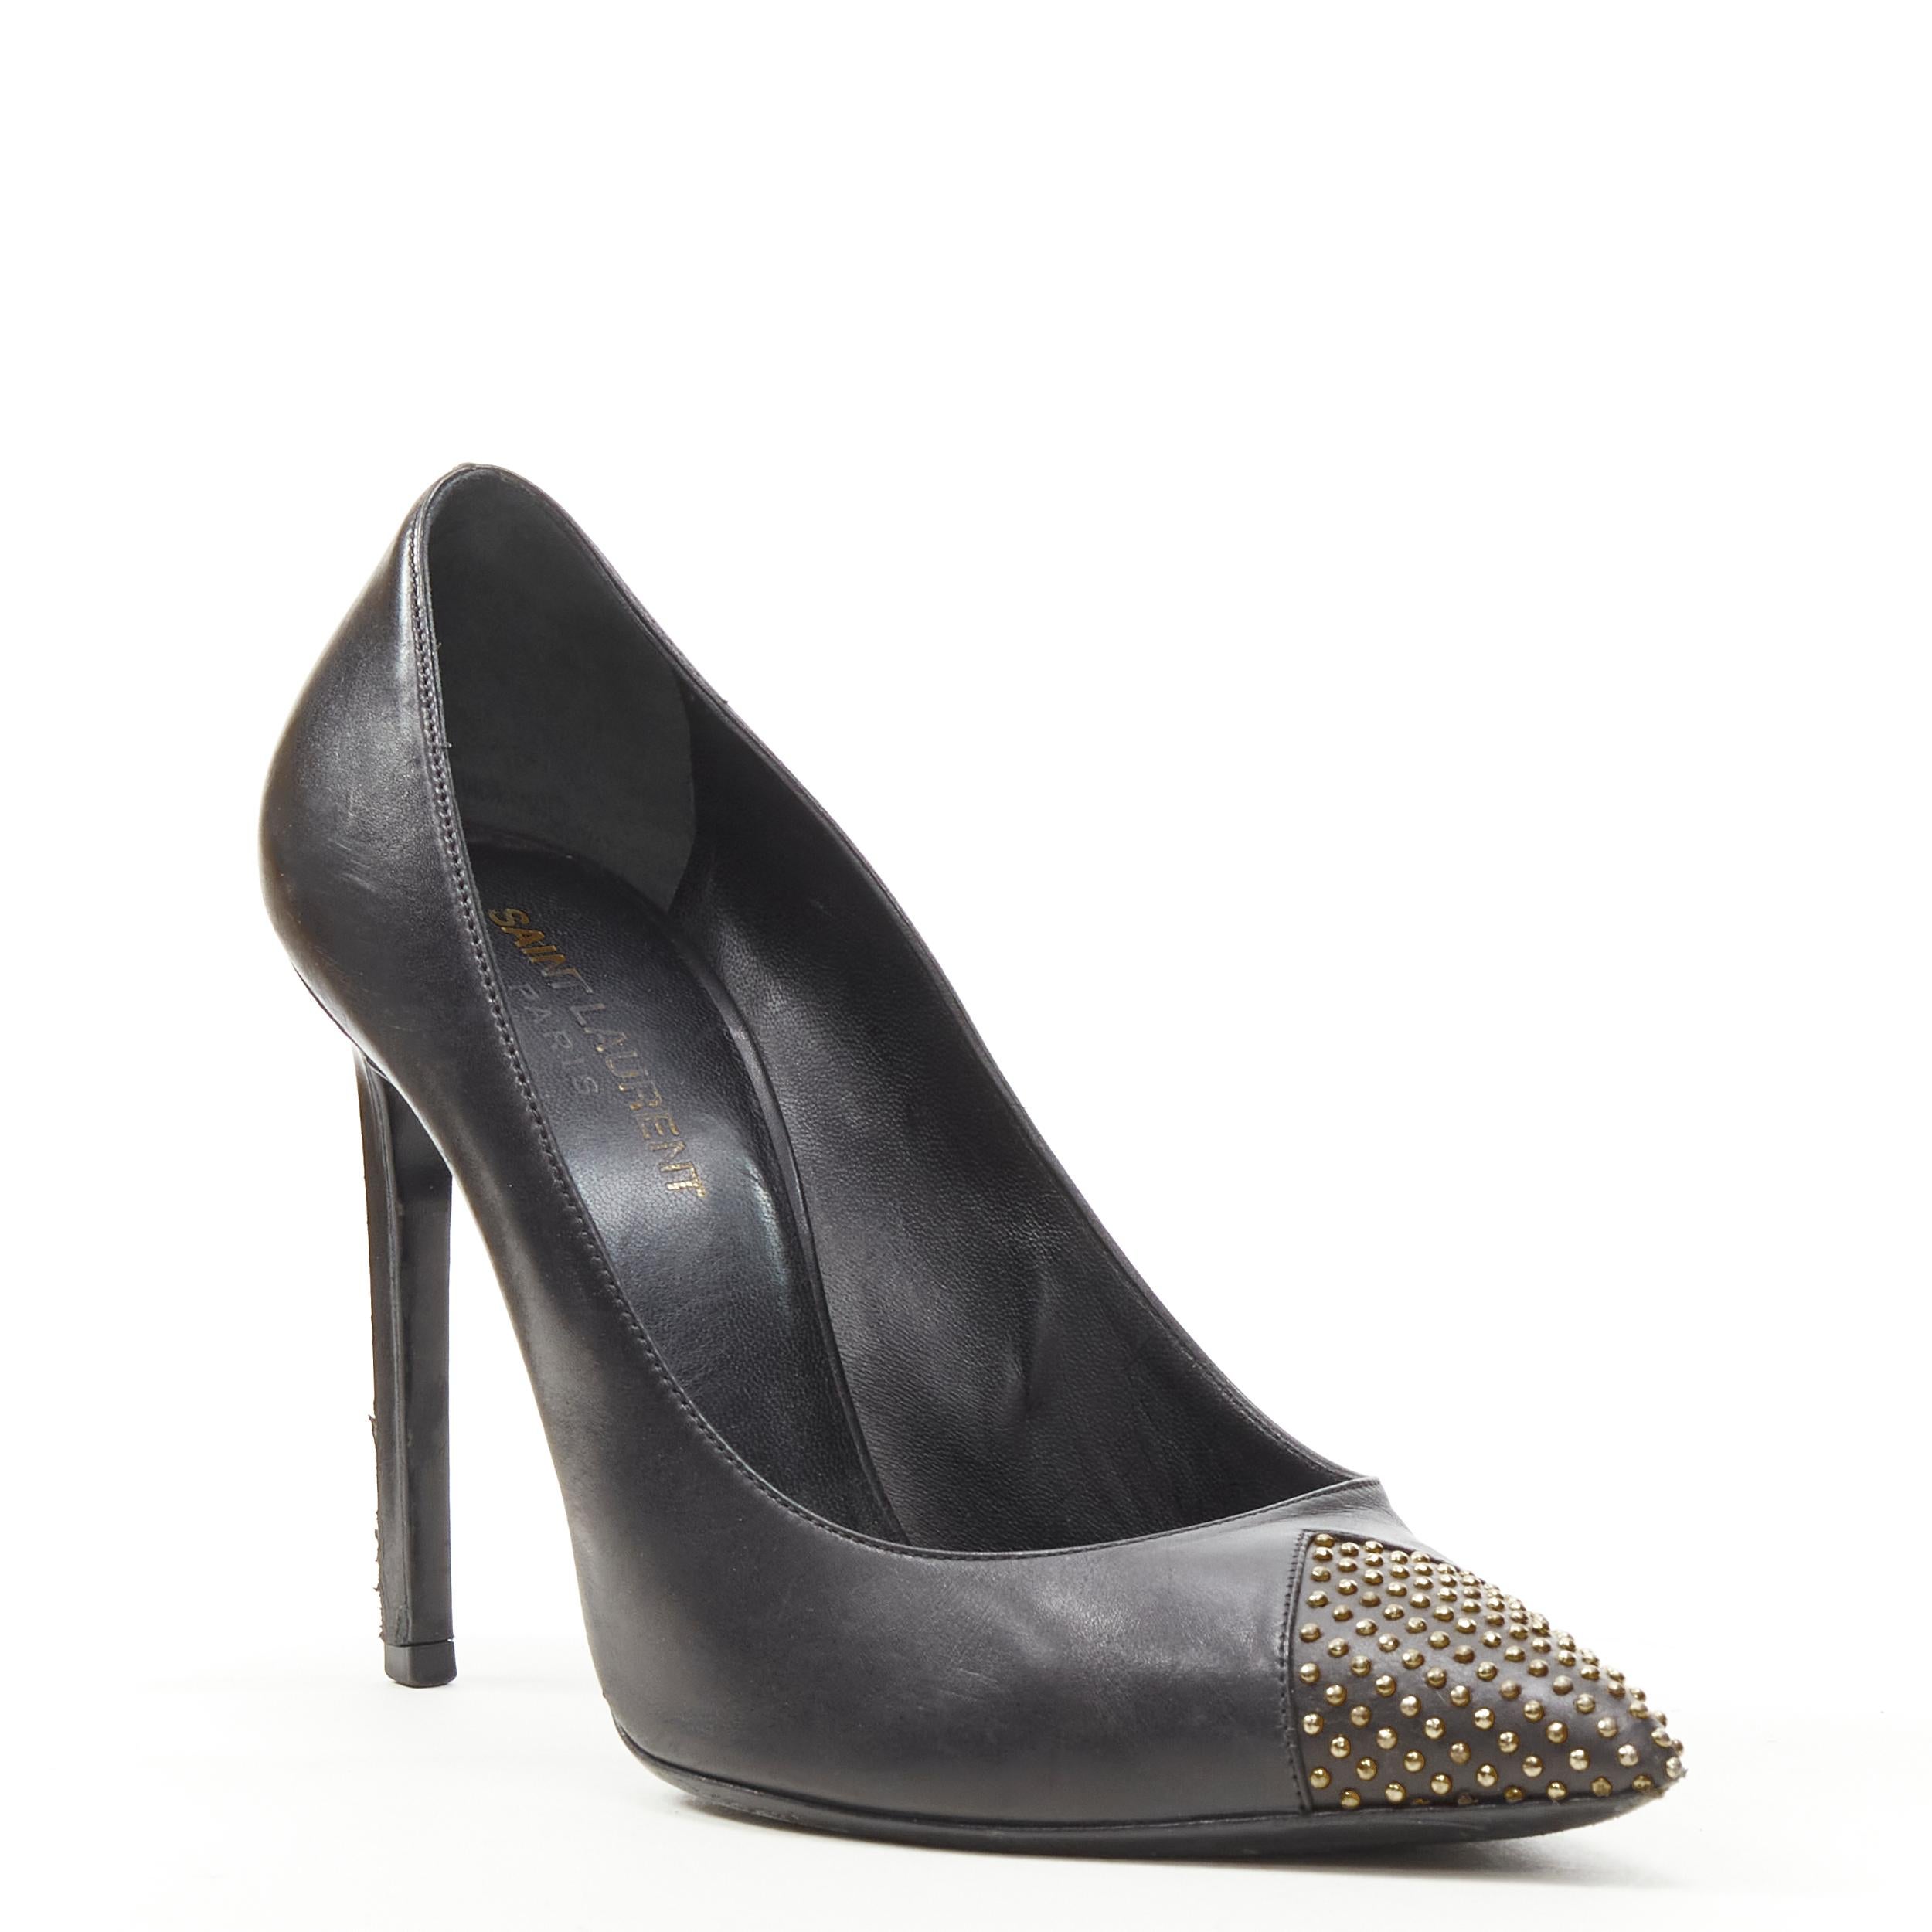 SAINT LAURENT Janis black leather gold icro stud toe cap high heel pump EU38 
Reference: KEDG/A00124 
Brand: Saint Laurent 
Model: Janis 
Material: Leather 
Color: Black 
Pattern: Solid 
Made in: Italy 

CONDITION: 
Condition: Fair, this item was